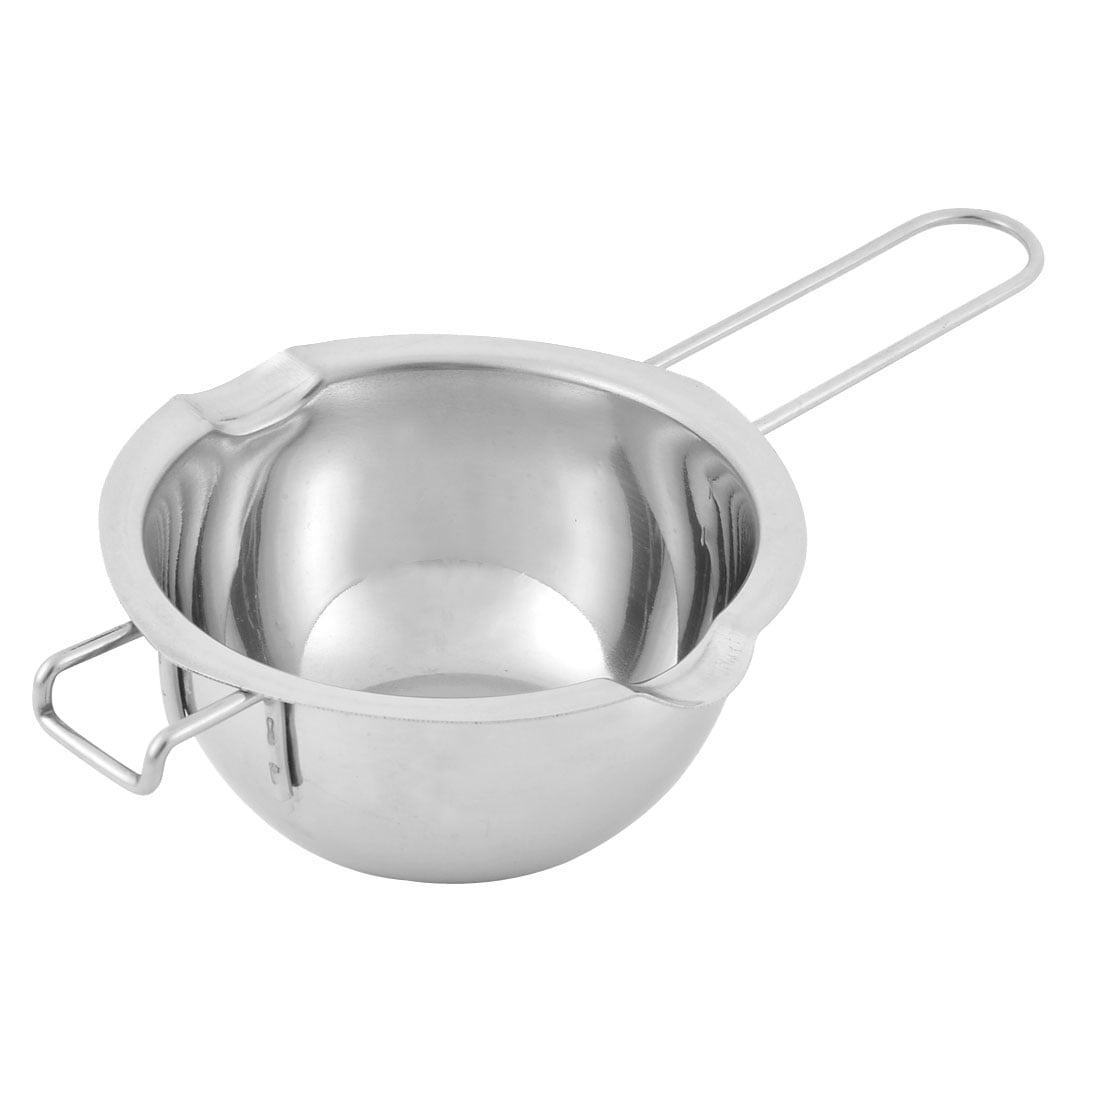 1.5-Quart 53771 BonJour Chefs Tools Stainless Steel All-in-One Stovetop Double Boiler